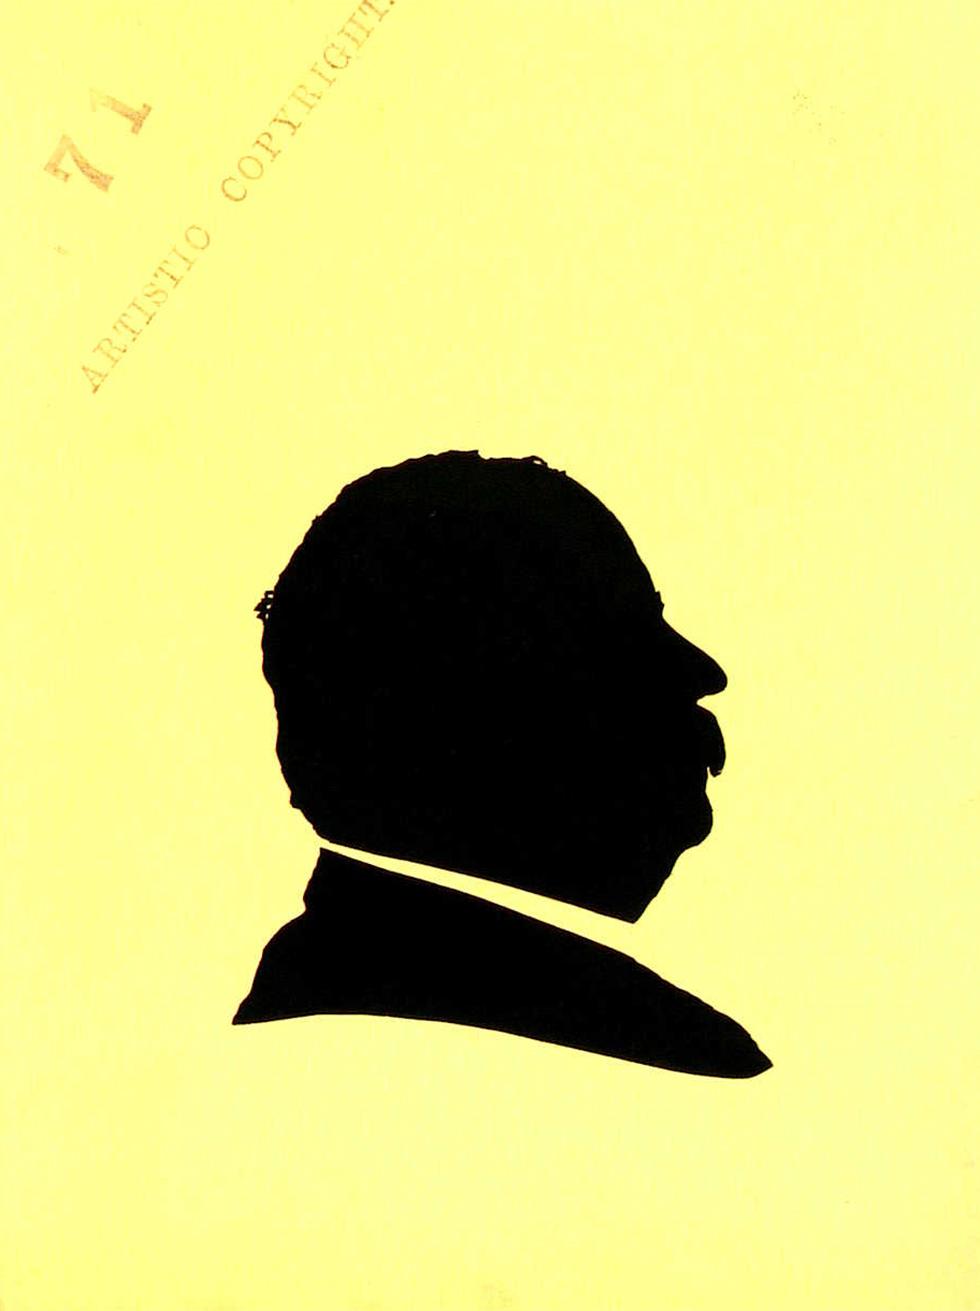 George Reid's silhouette made in 1907 and included in an artist's application for copyright.